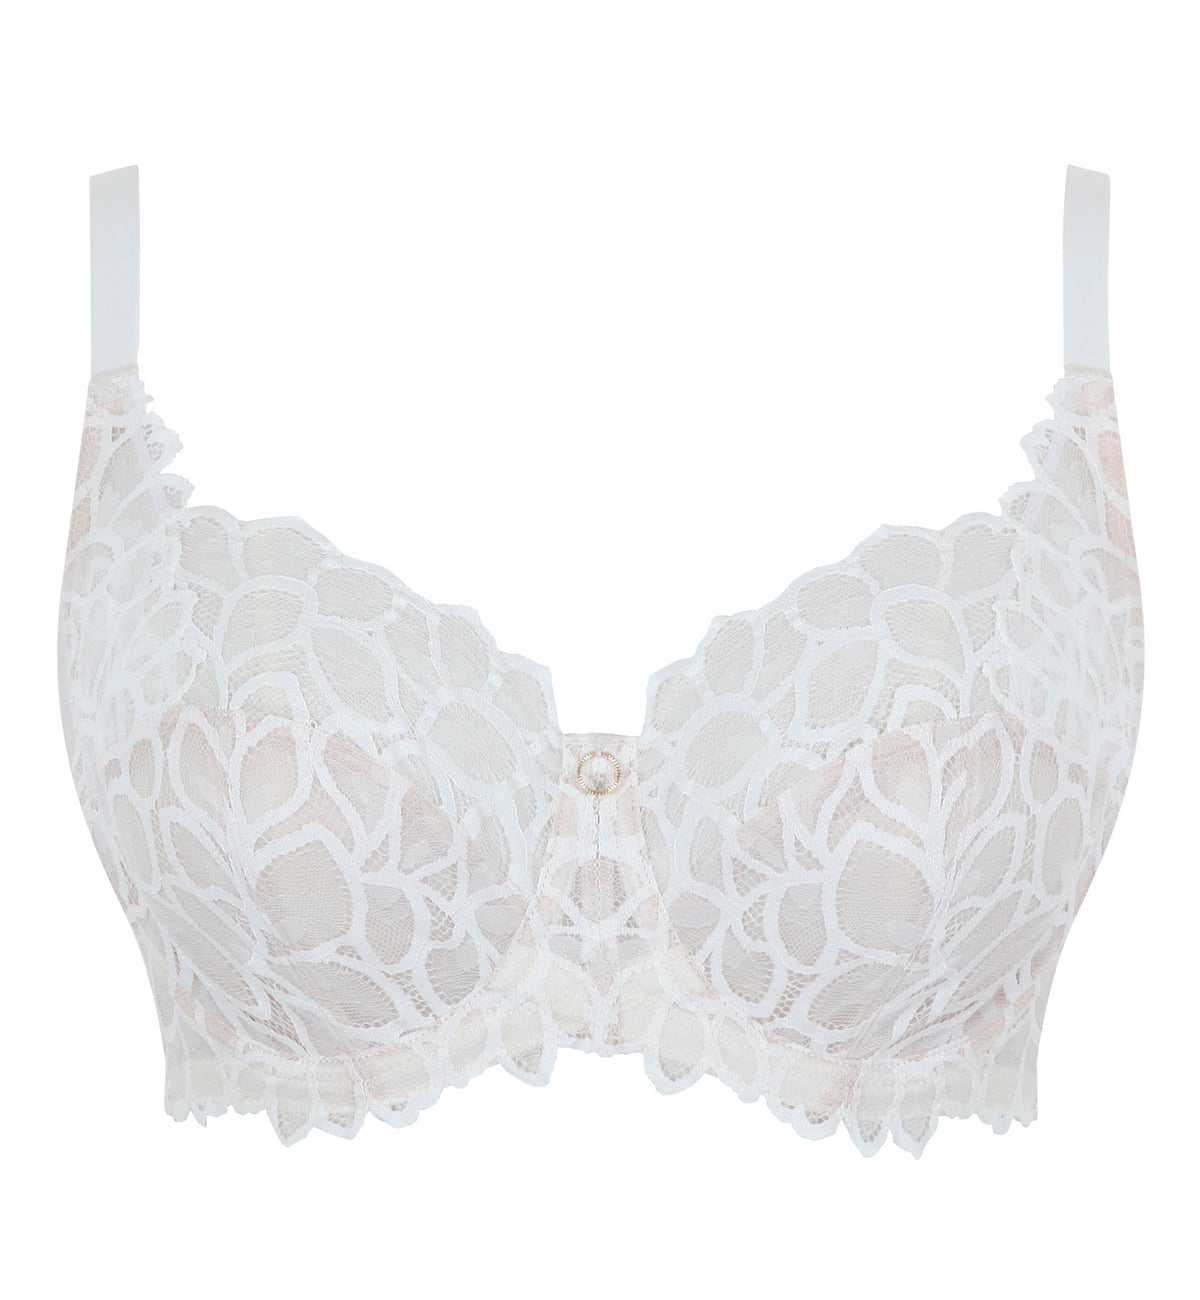 Panache Allure Stretch Lace Full Cup Underwire Bra (10765),30D,Ivory - Ivory,30D